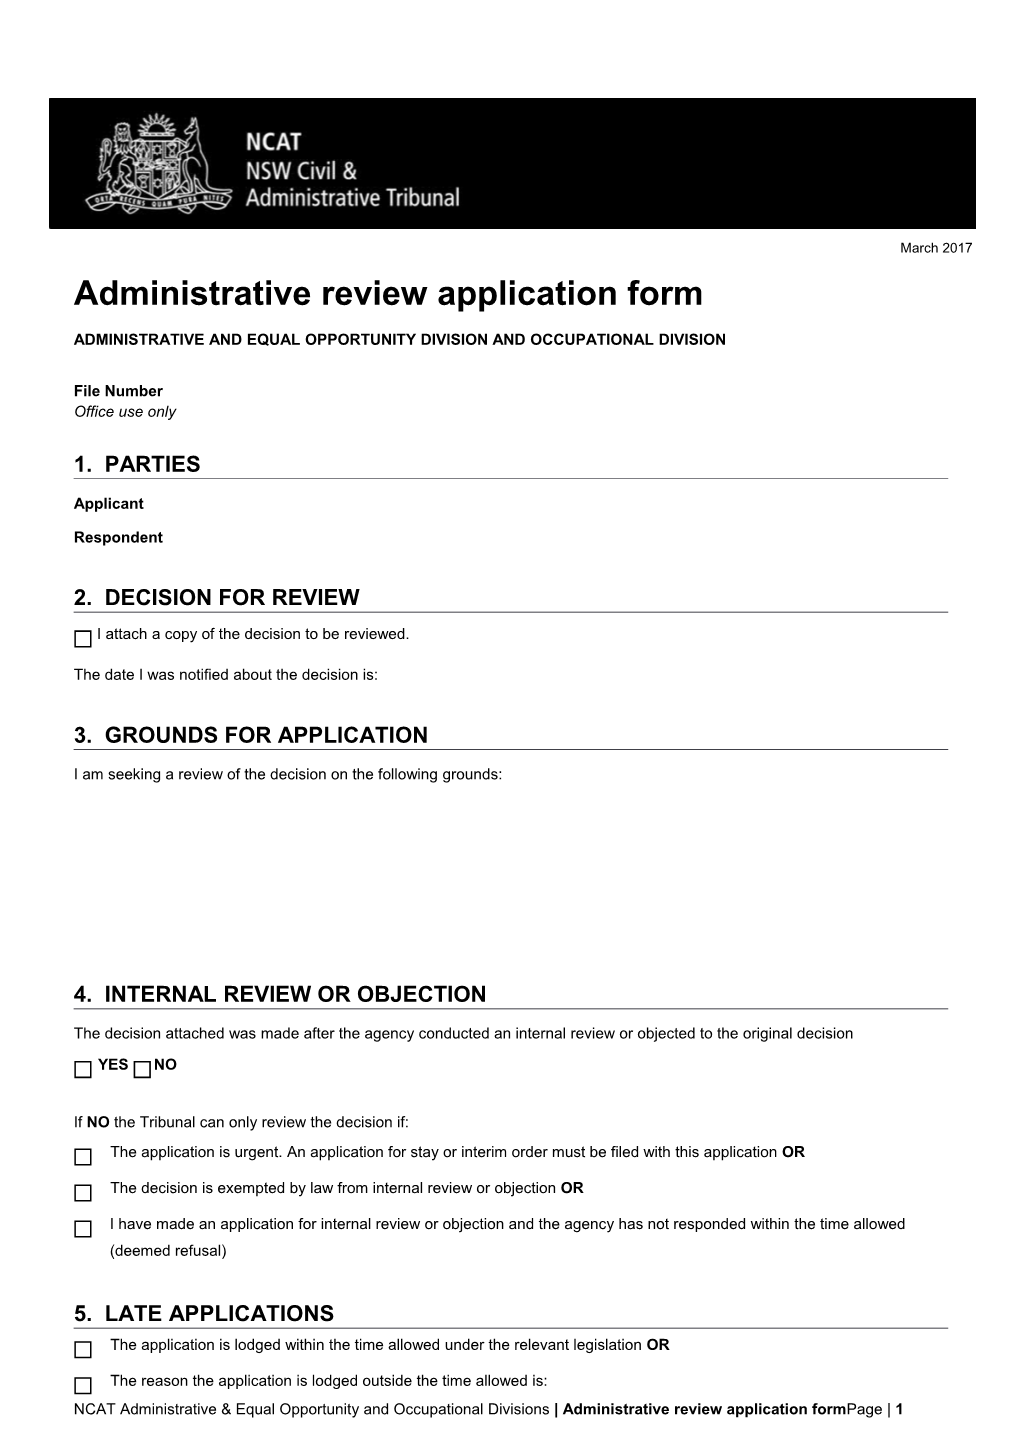 Administrative Review Application Form